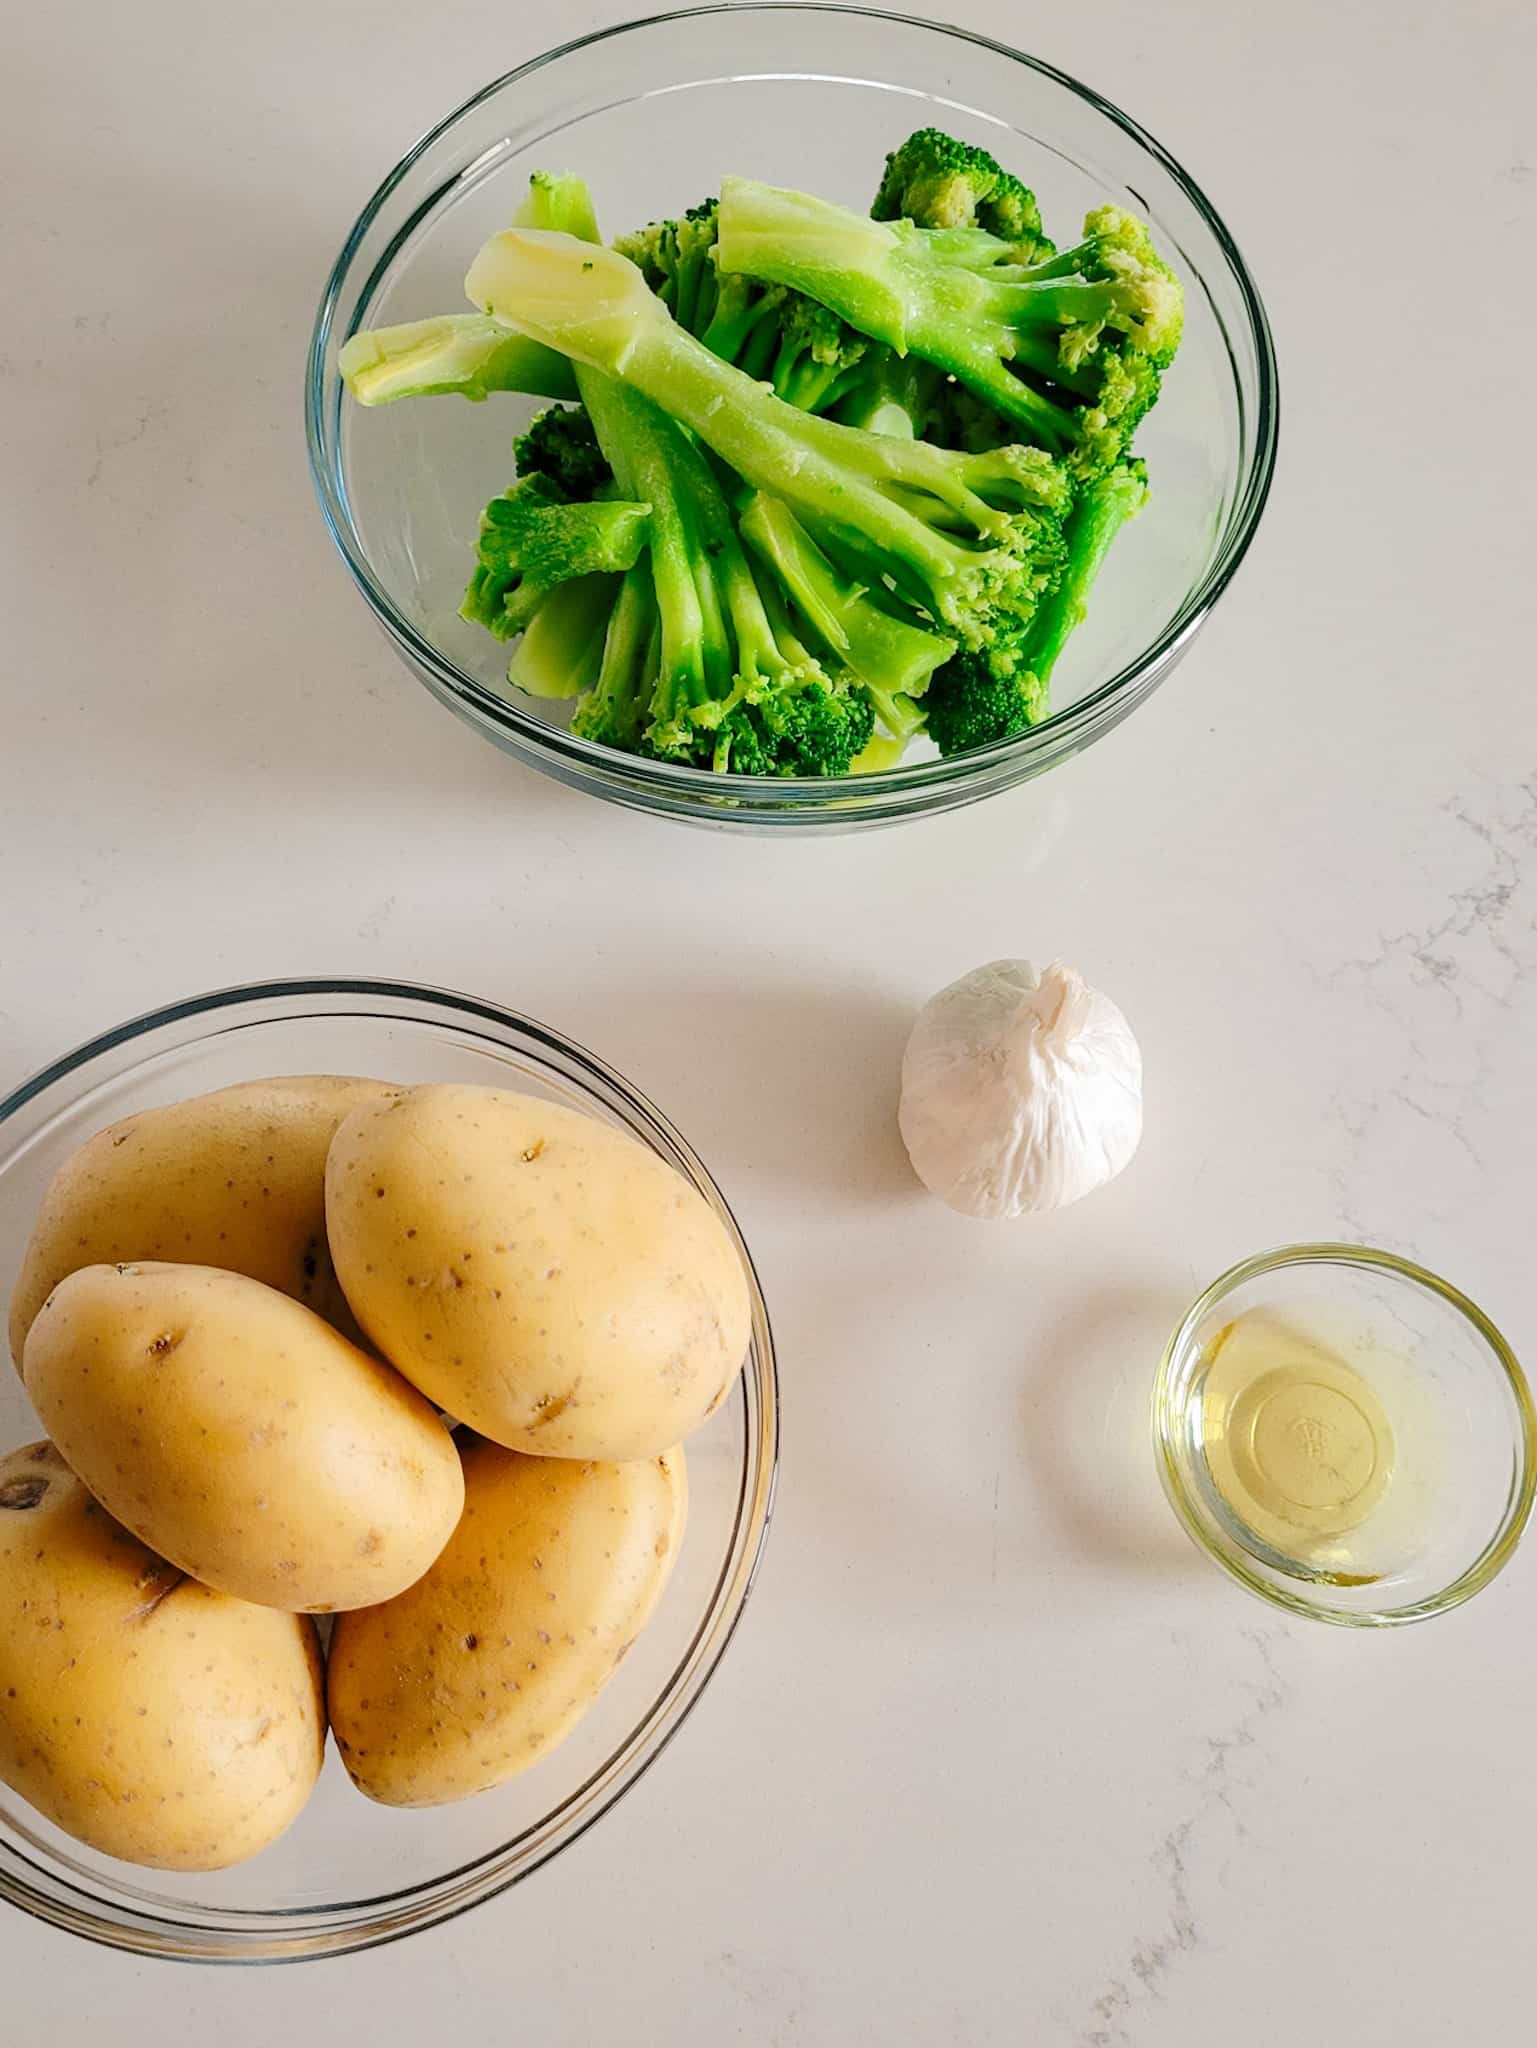 ingredients for galic roasted potatoes and broccoli